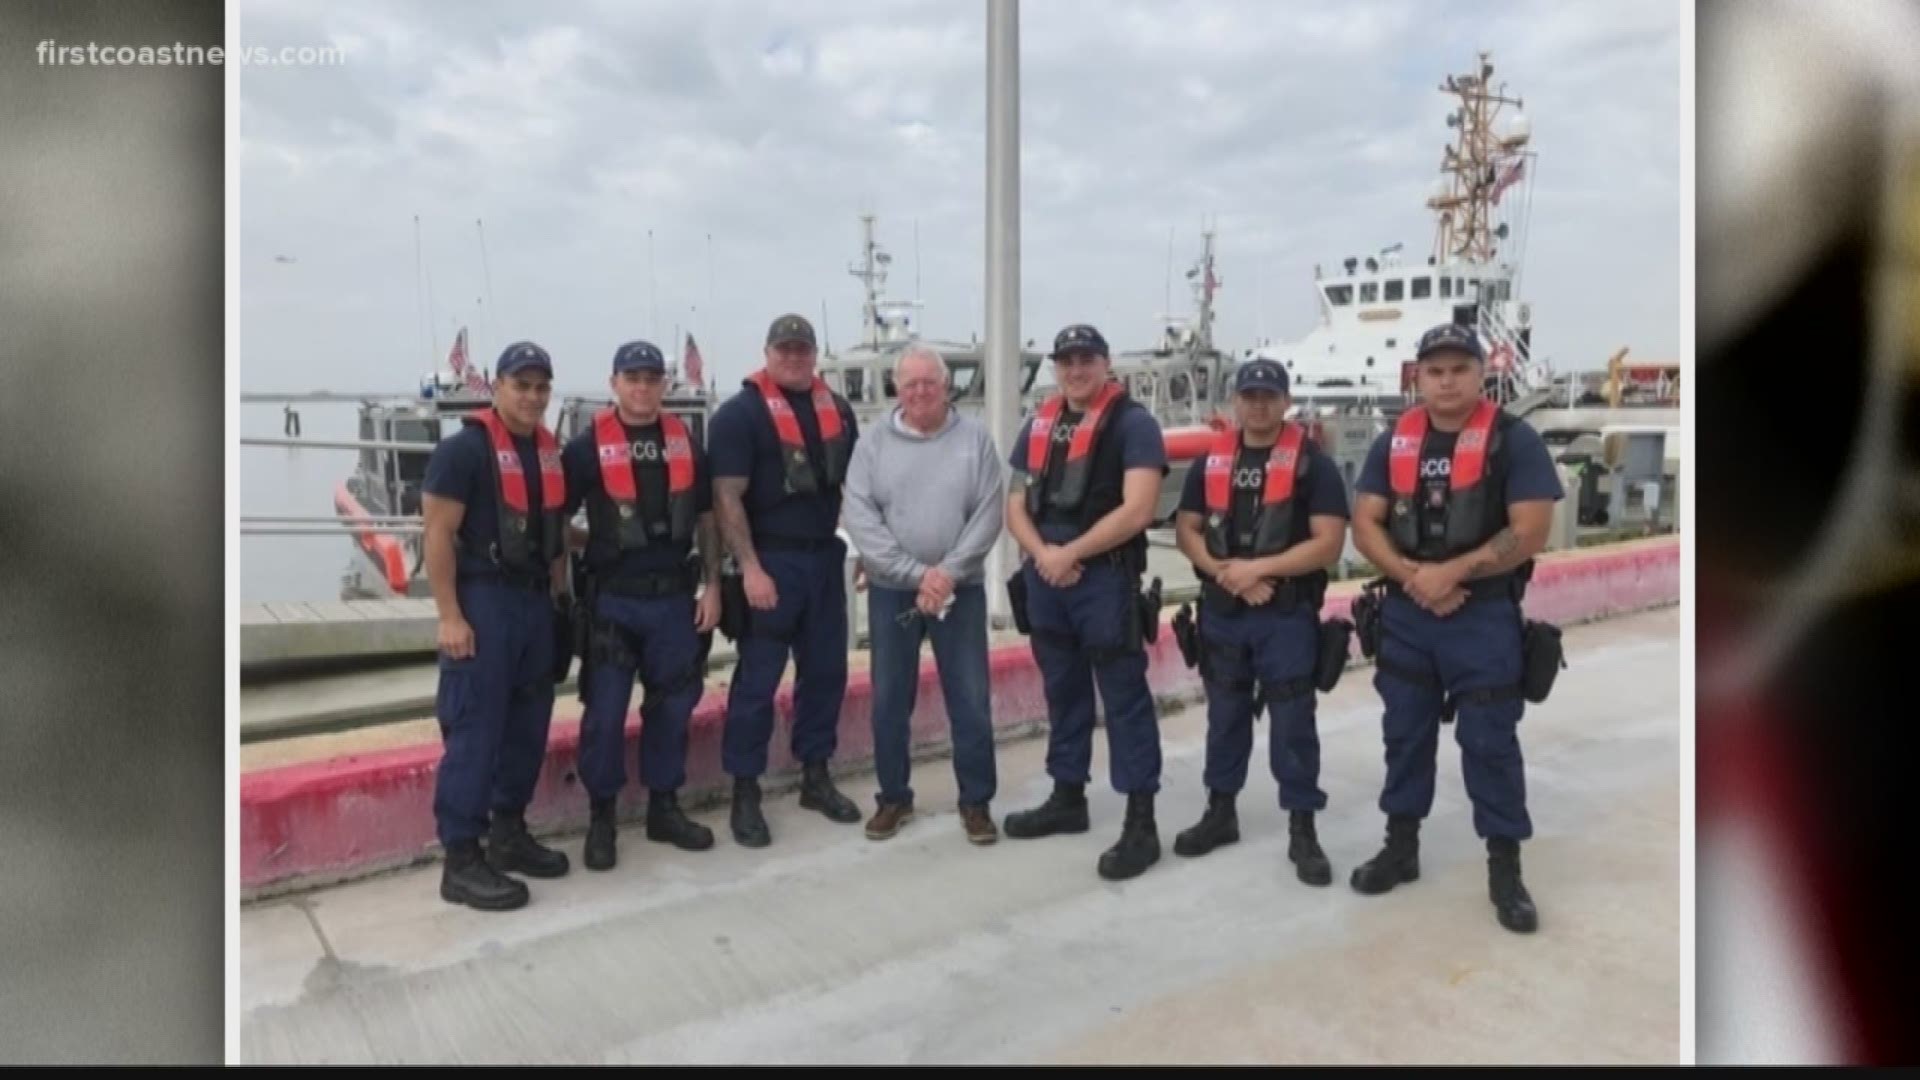 The United States Coast Guard was conducting law enforcement patrols around 11 a.m. when they saw a man holding on to a life ring in the middle of the inlet.